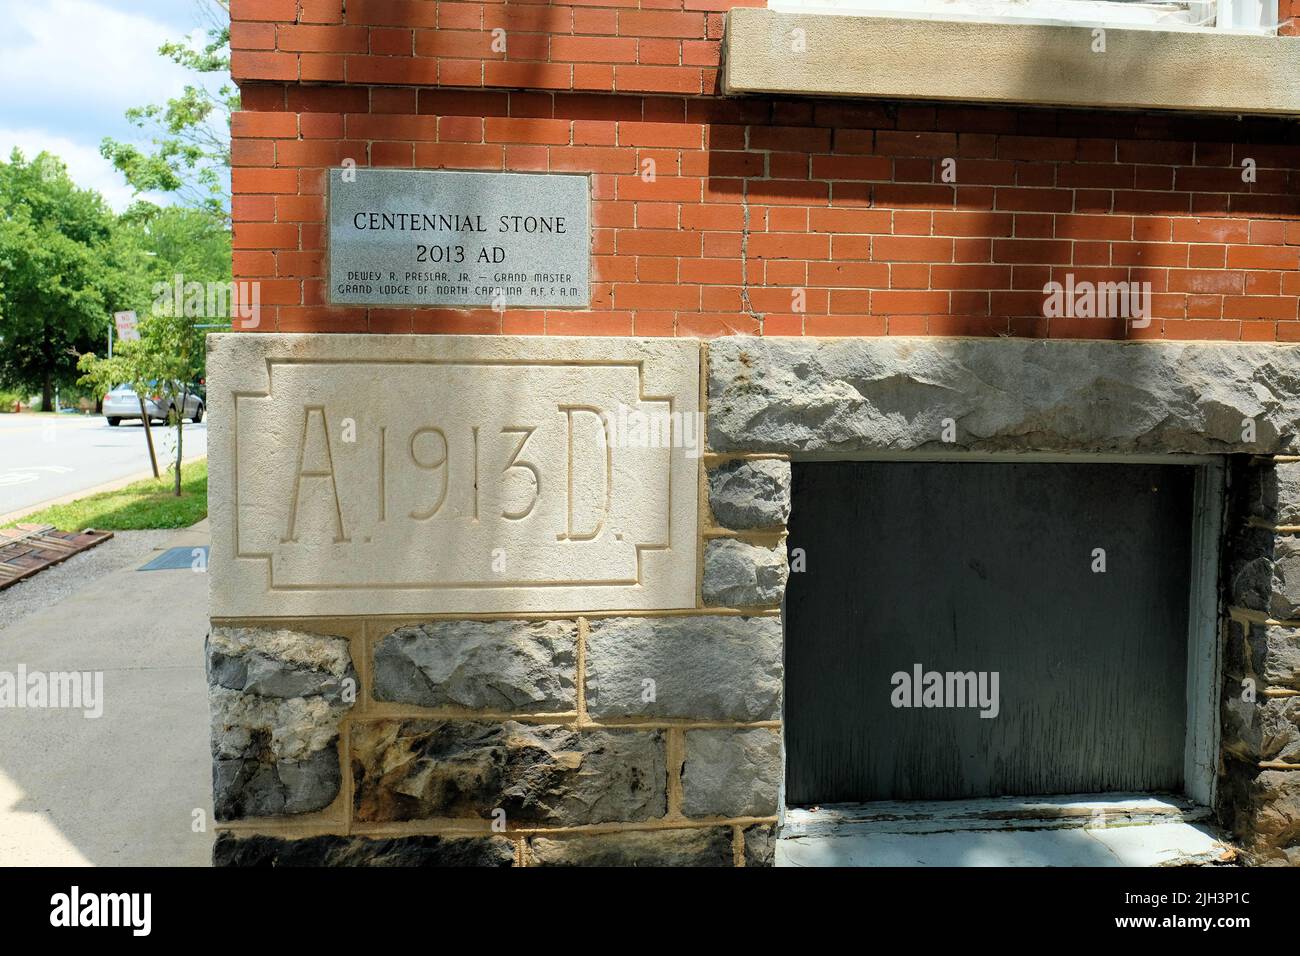 The original 3200 lb. cornerstone for the Asheville Masonic Temple laid in 1913 below the Centennial Stone placed in 2013; Asheville, North Carolina. Stock Photo